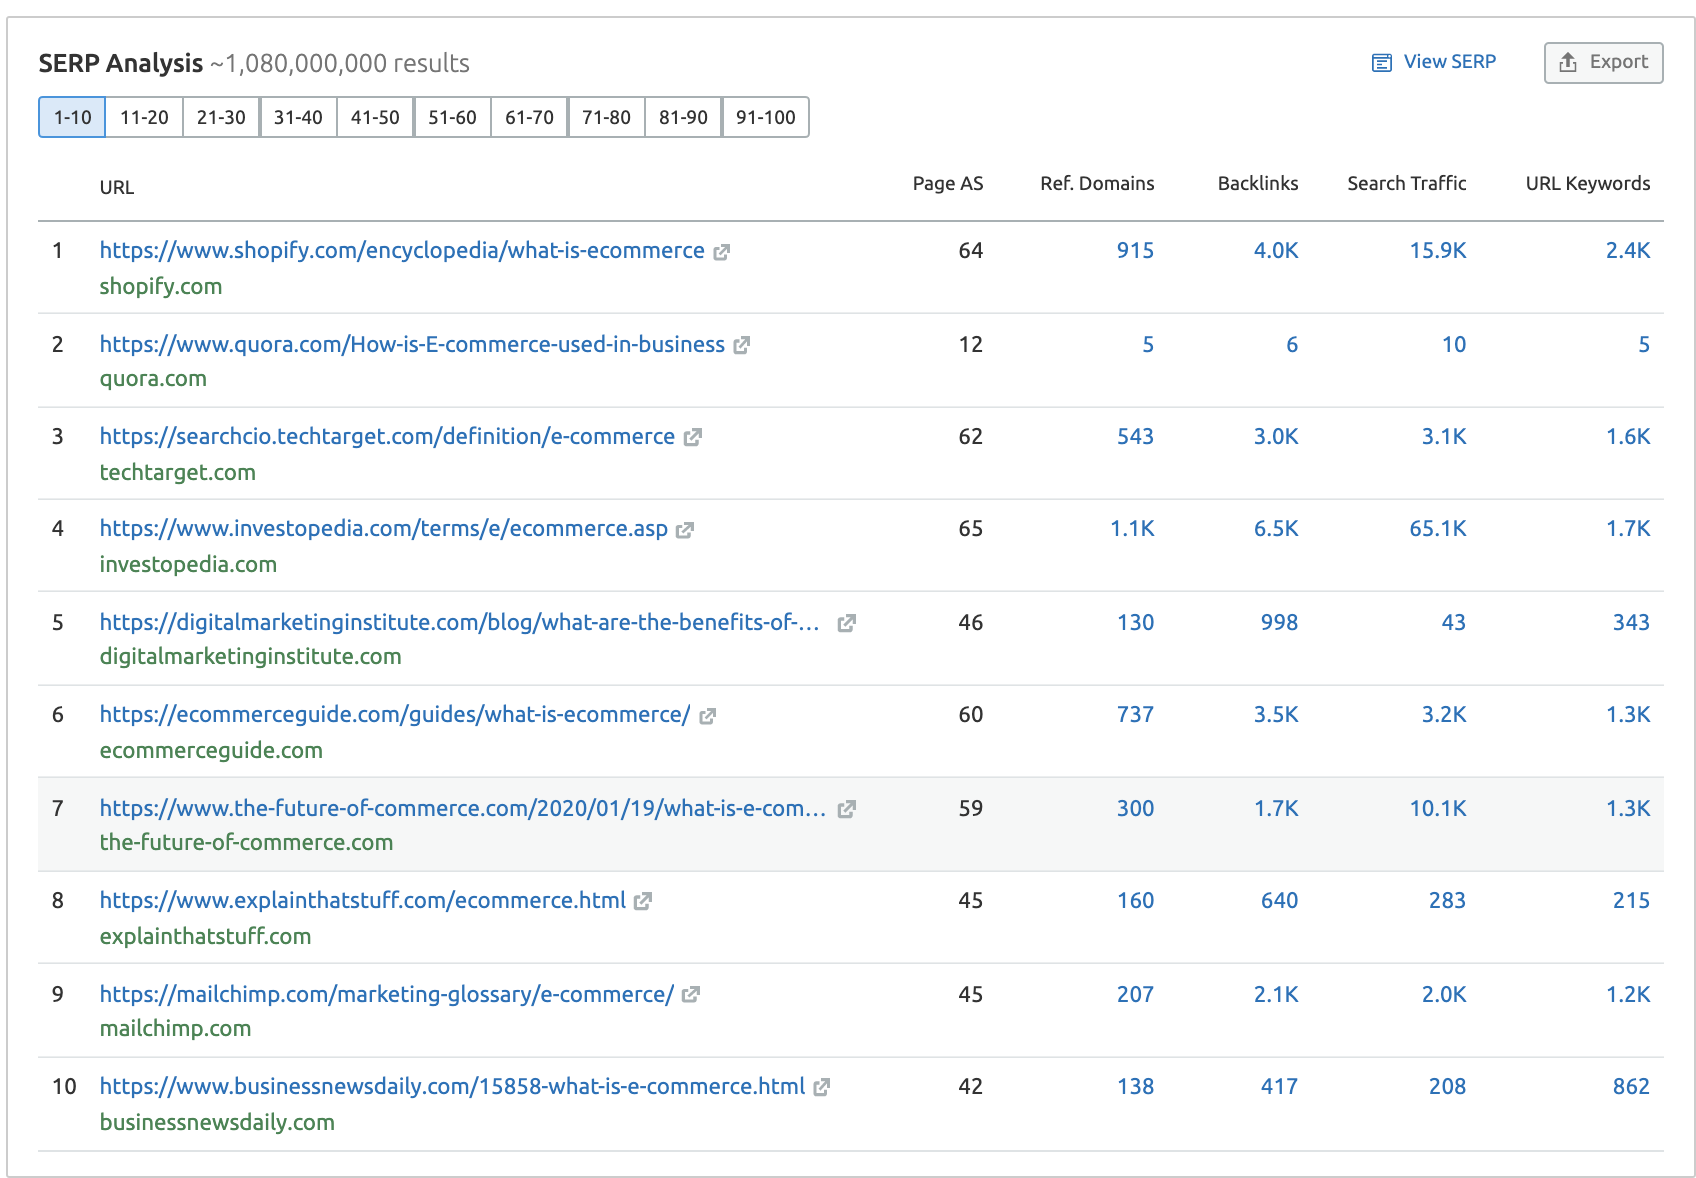 Keyword Overview results